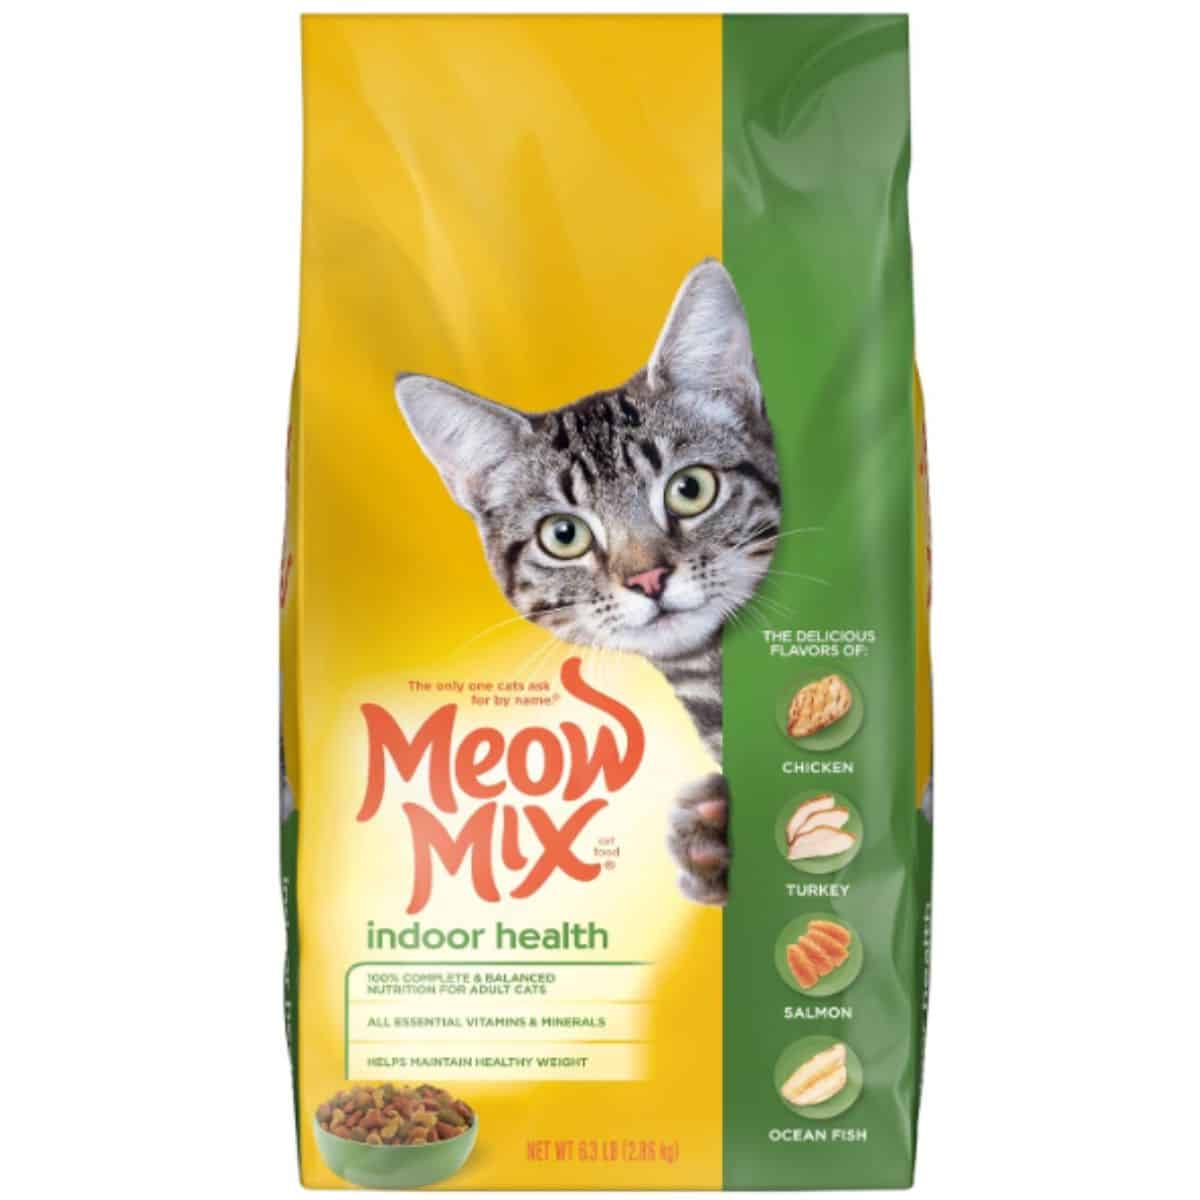 Meow Mix Dry By JM Smucker